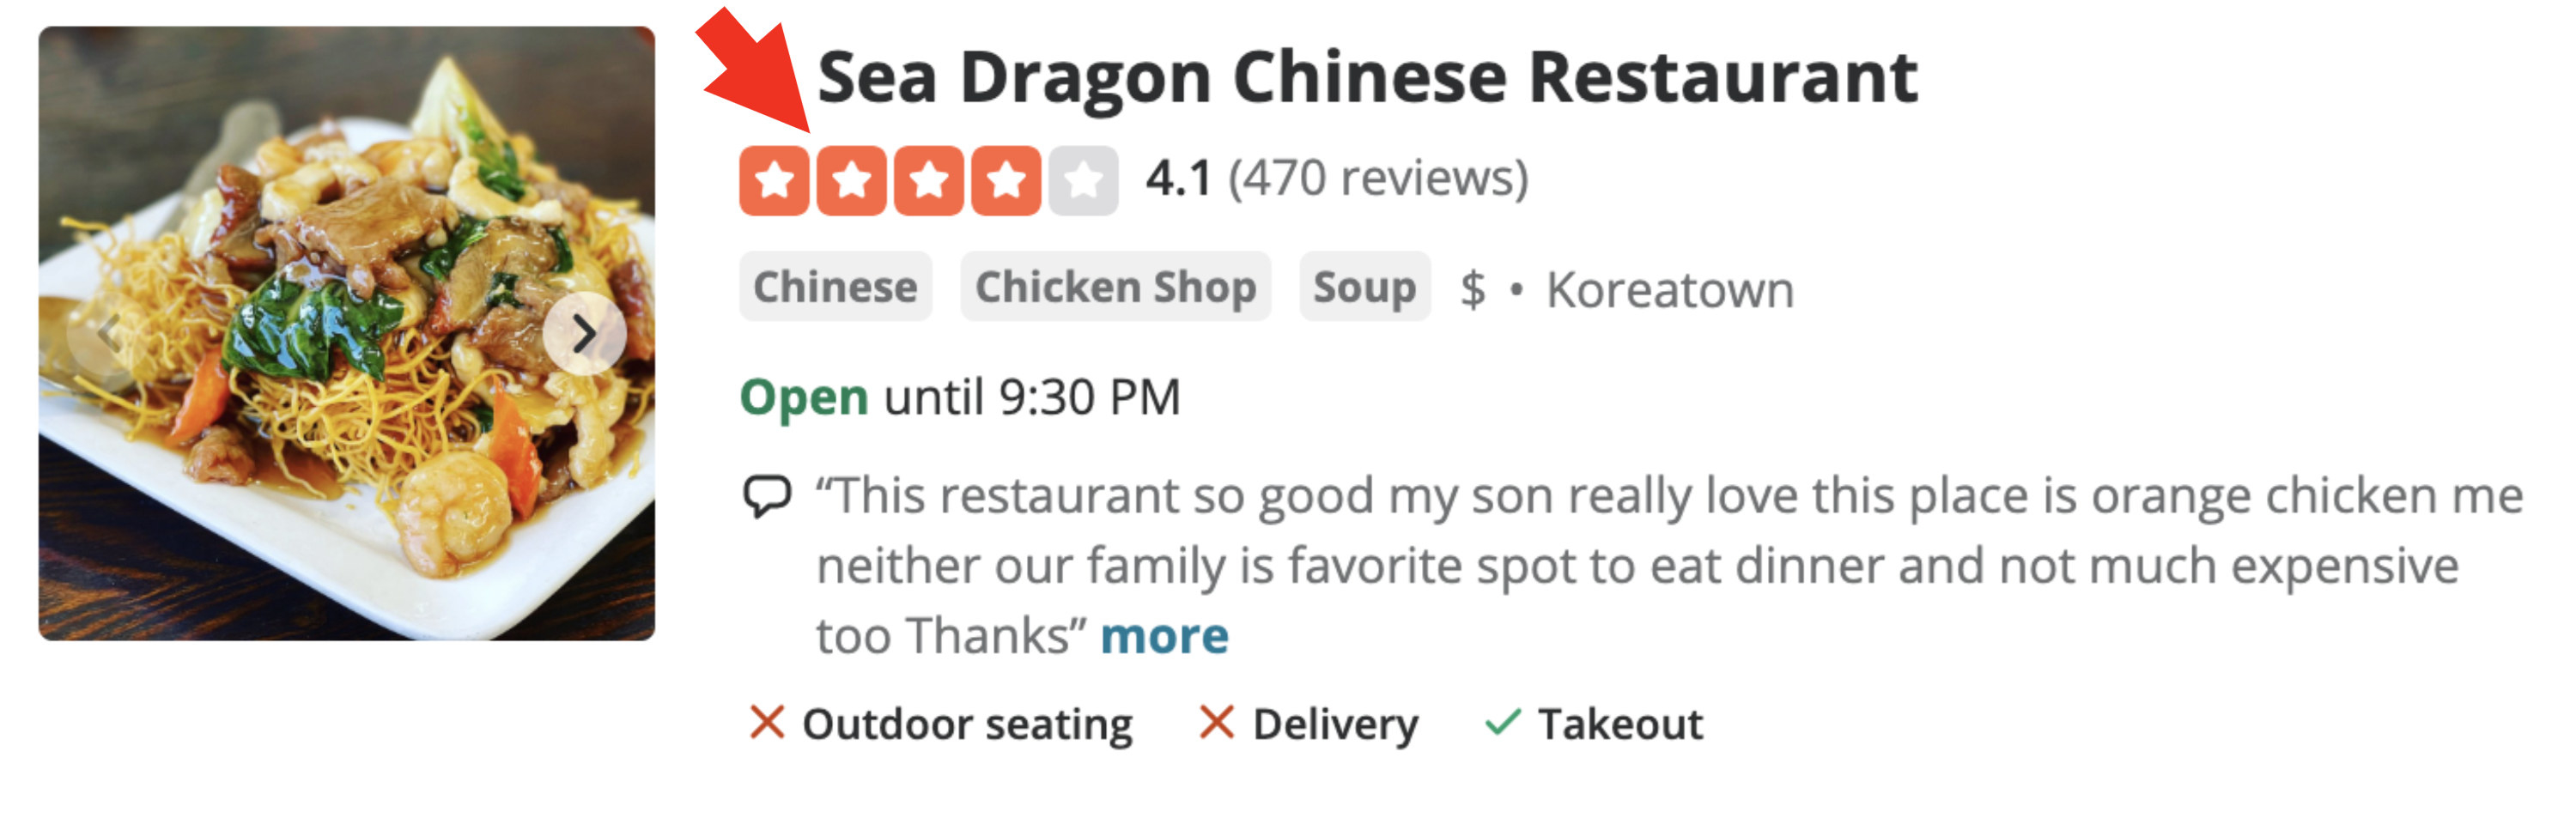 Sea Dragon Chinese Restaurant&#x27;s Yelp page